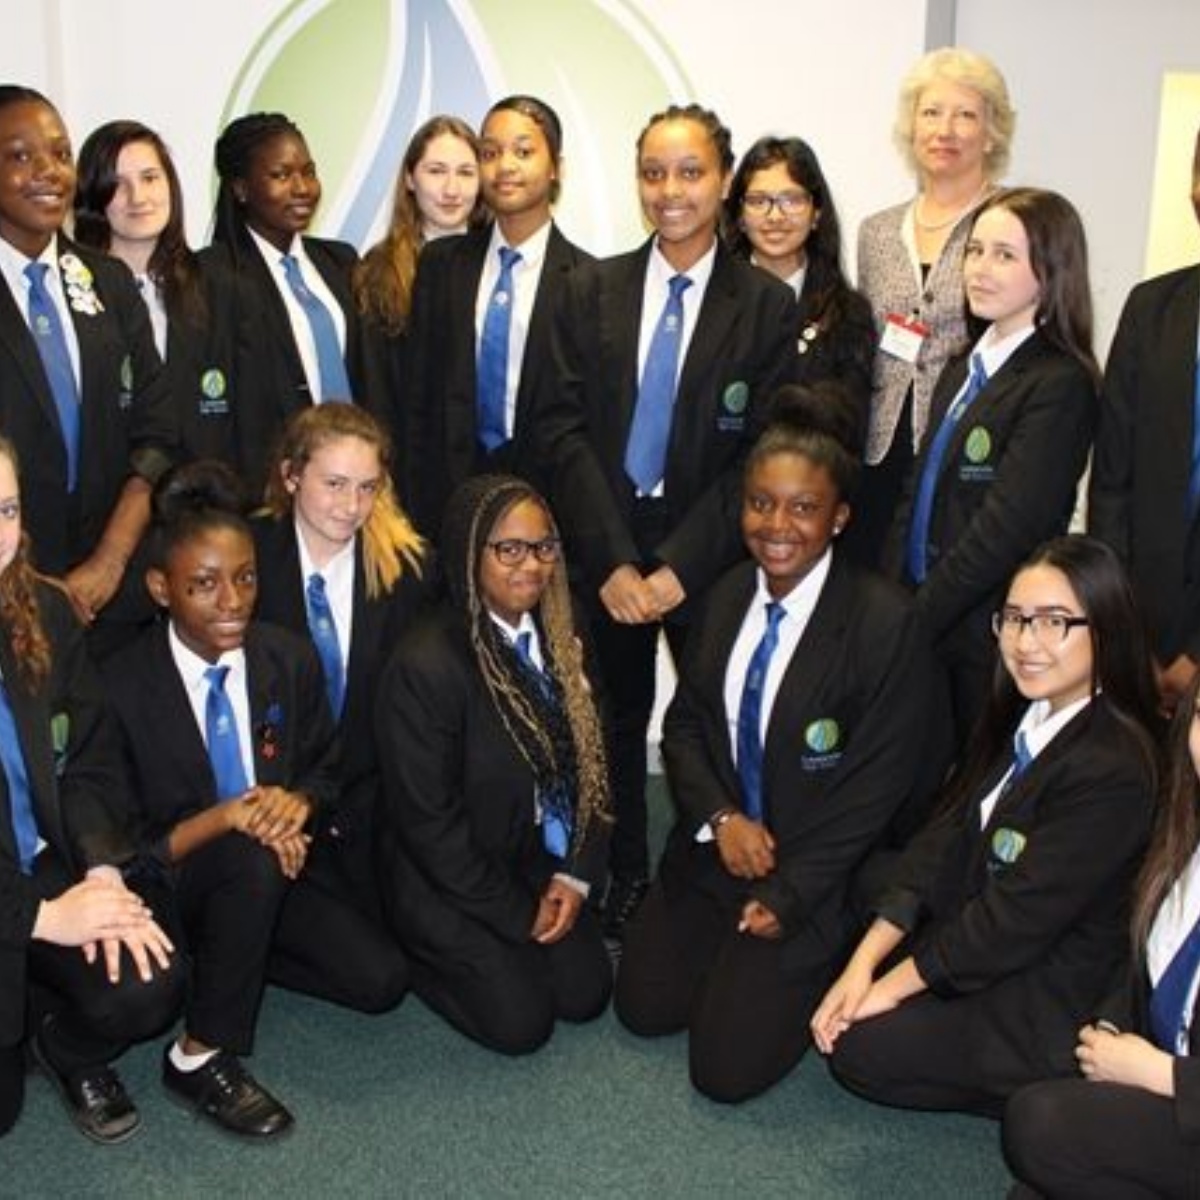 Lealands High School - Chairman of The Petroleum Group Inspires Year 9 ...